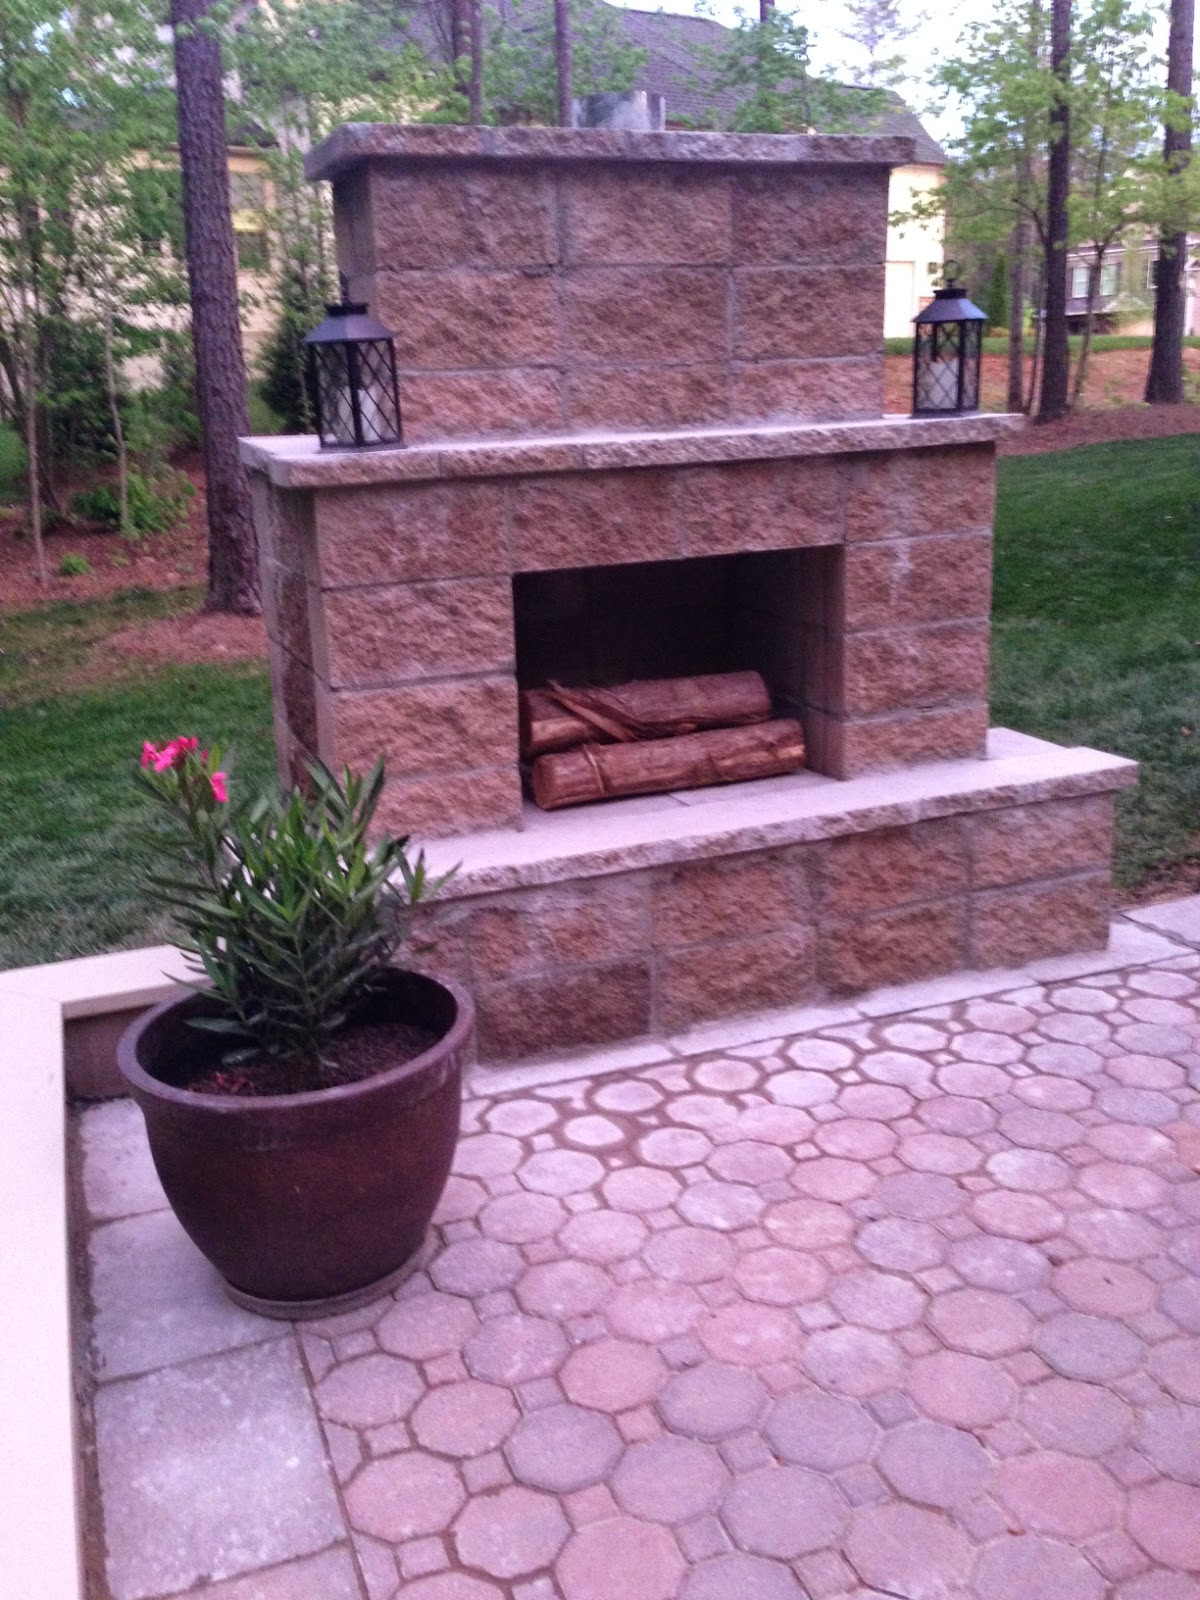 Outdoor Fireplace DIY
 Life in the Barbie Dream House DIY Paver Patio and